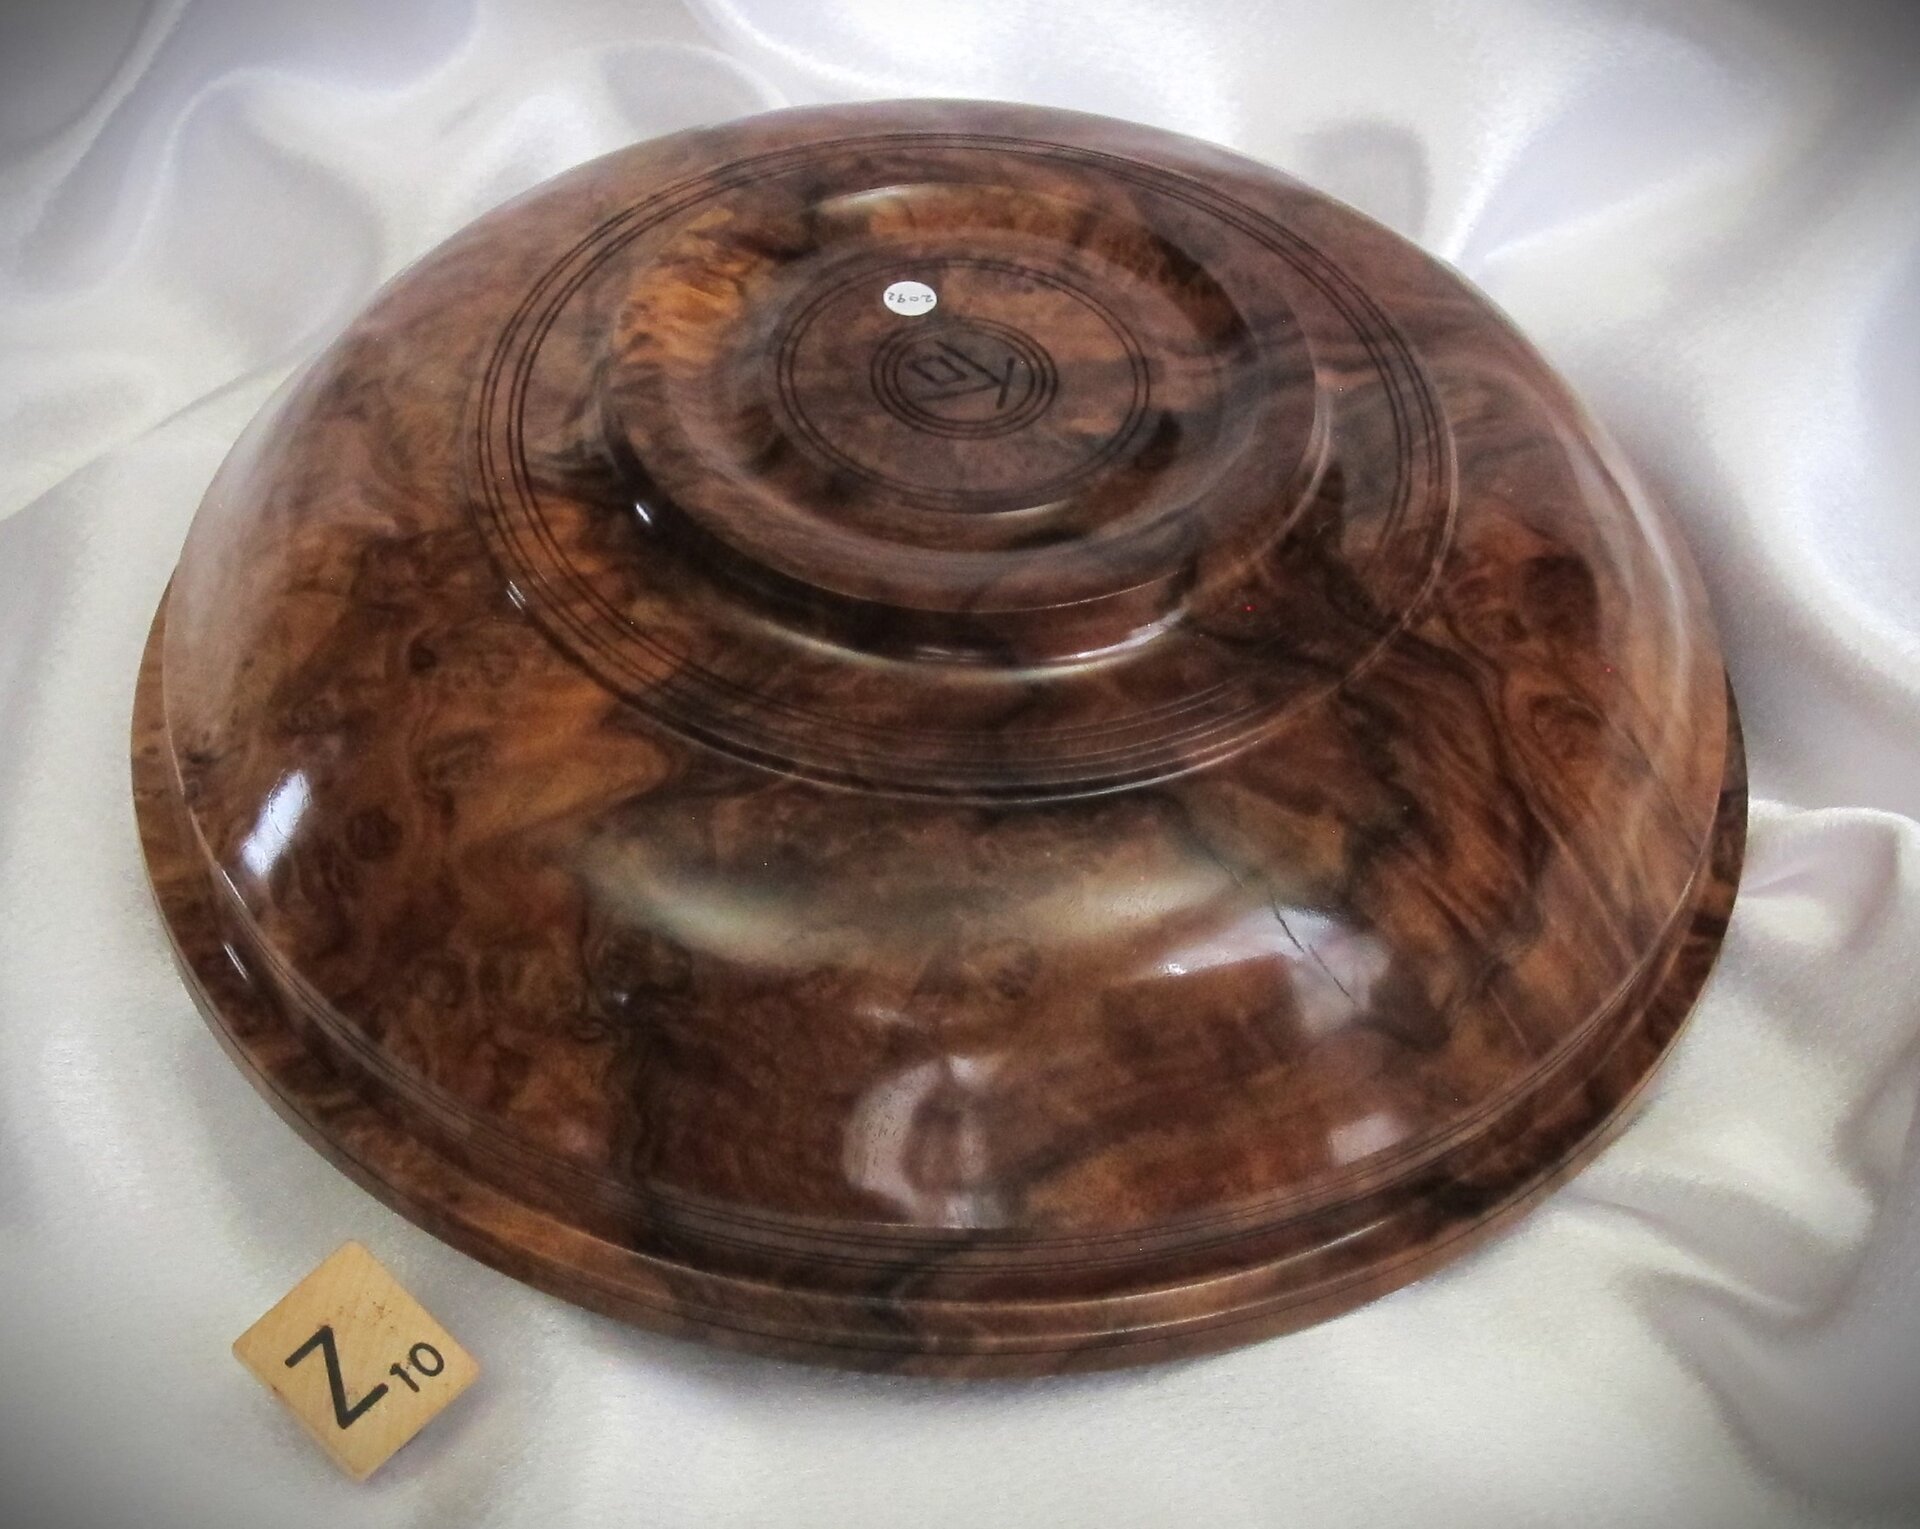 #2092 Australian Coolibah burl from the "Outback" territory...